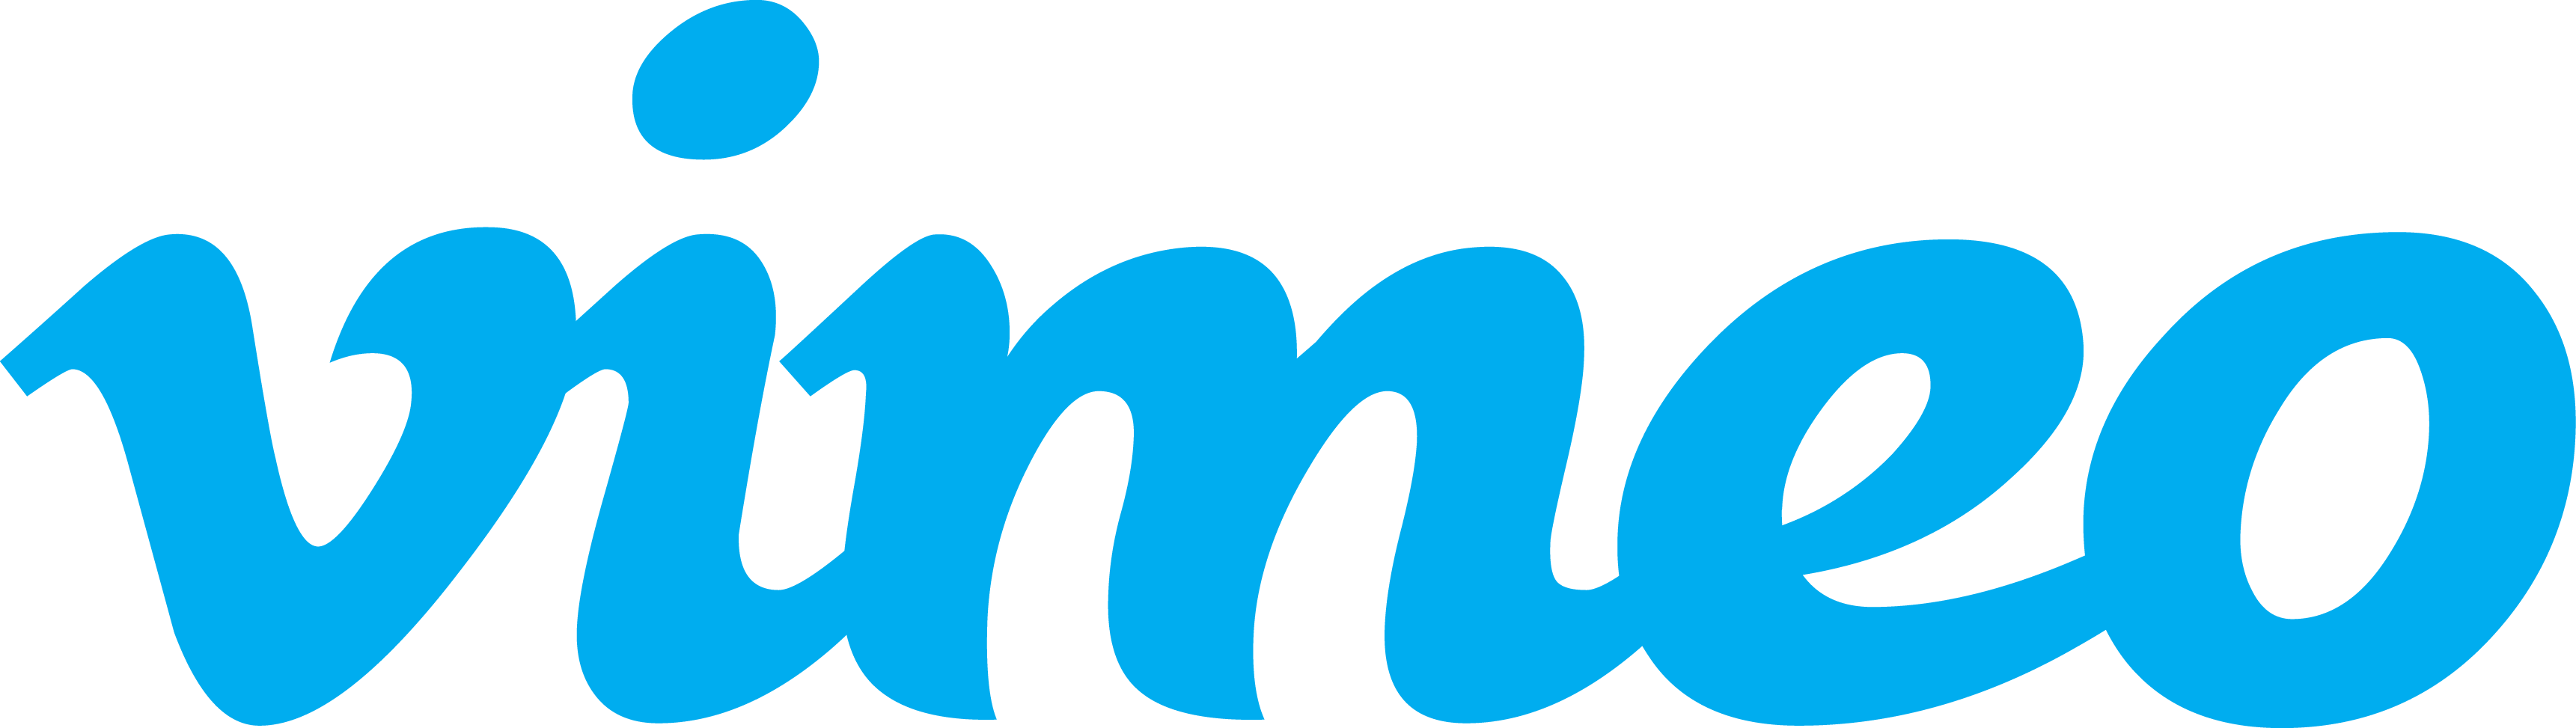 Vimeo raised $150m as its parent company consider a spin-off of the video platform